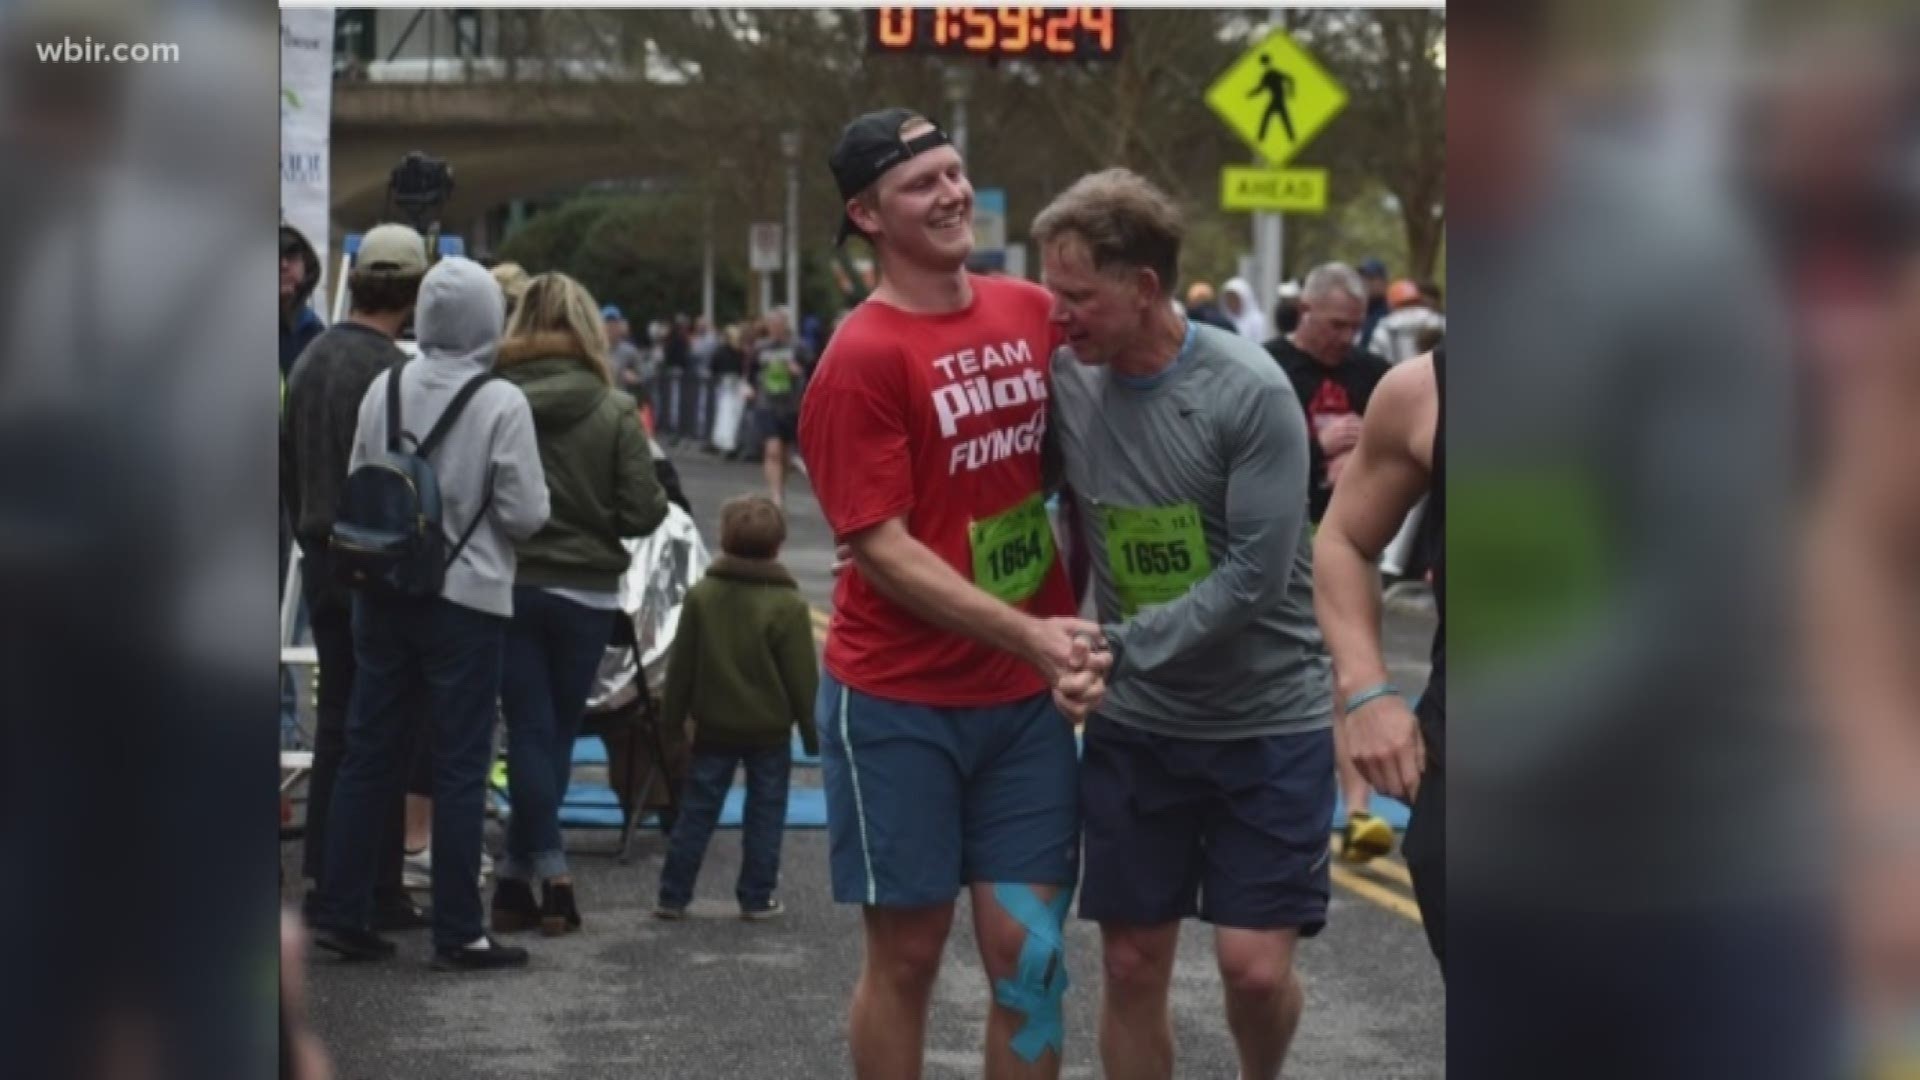 Todd Howell set a goal to finish the Covenant Health Knoxville half marathon in less than 2 hours. He did and we couldn't be more proud. A celebration of a job well done! April 2, 2019-4pm